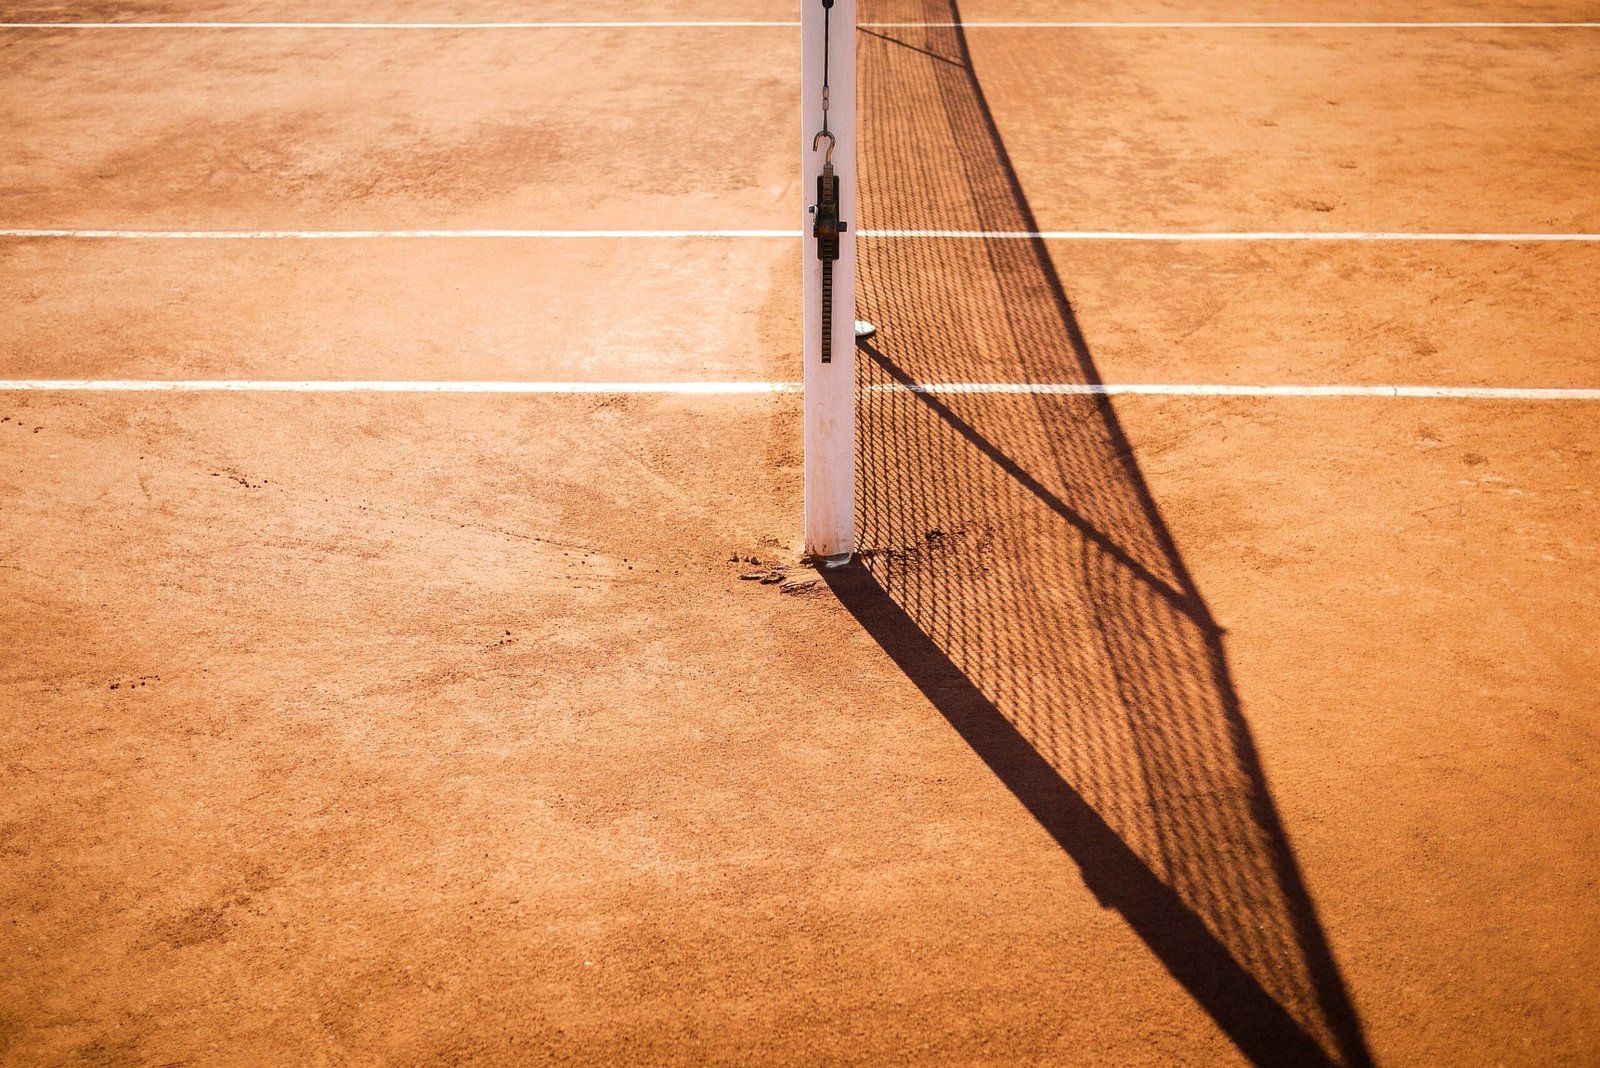 explore the latest news, updates, and information about the french open - one of the most prestigious tennis tournaments in the world.